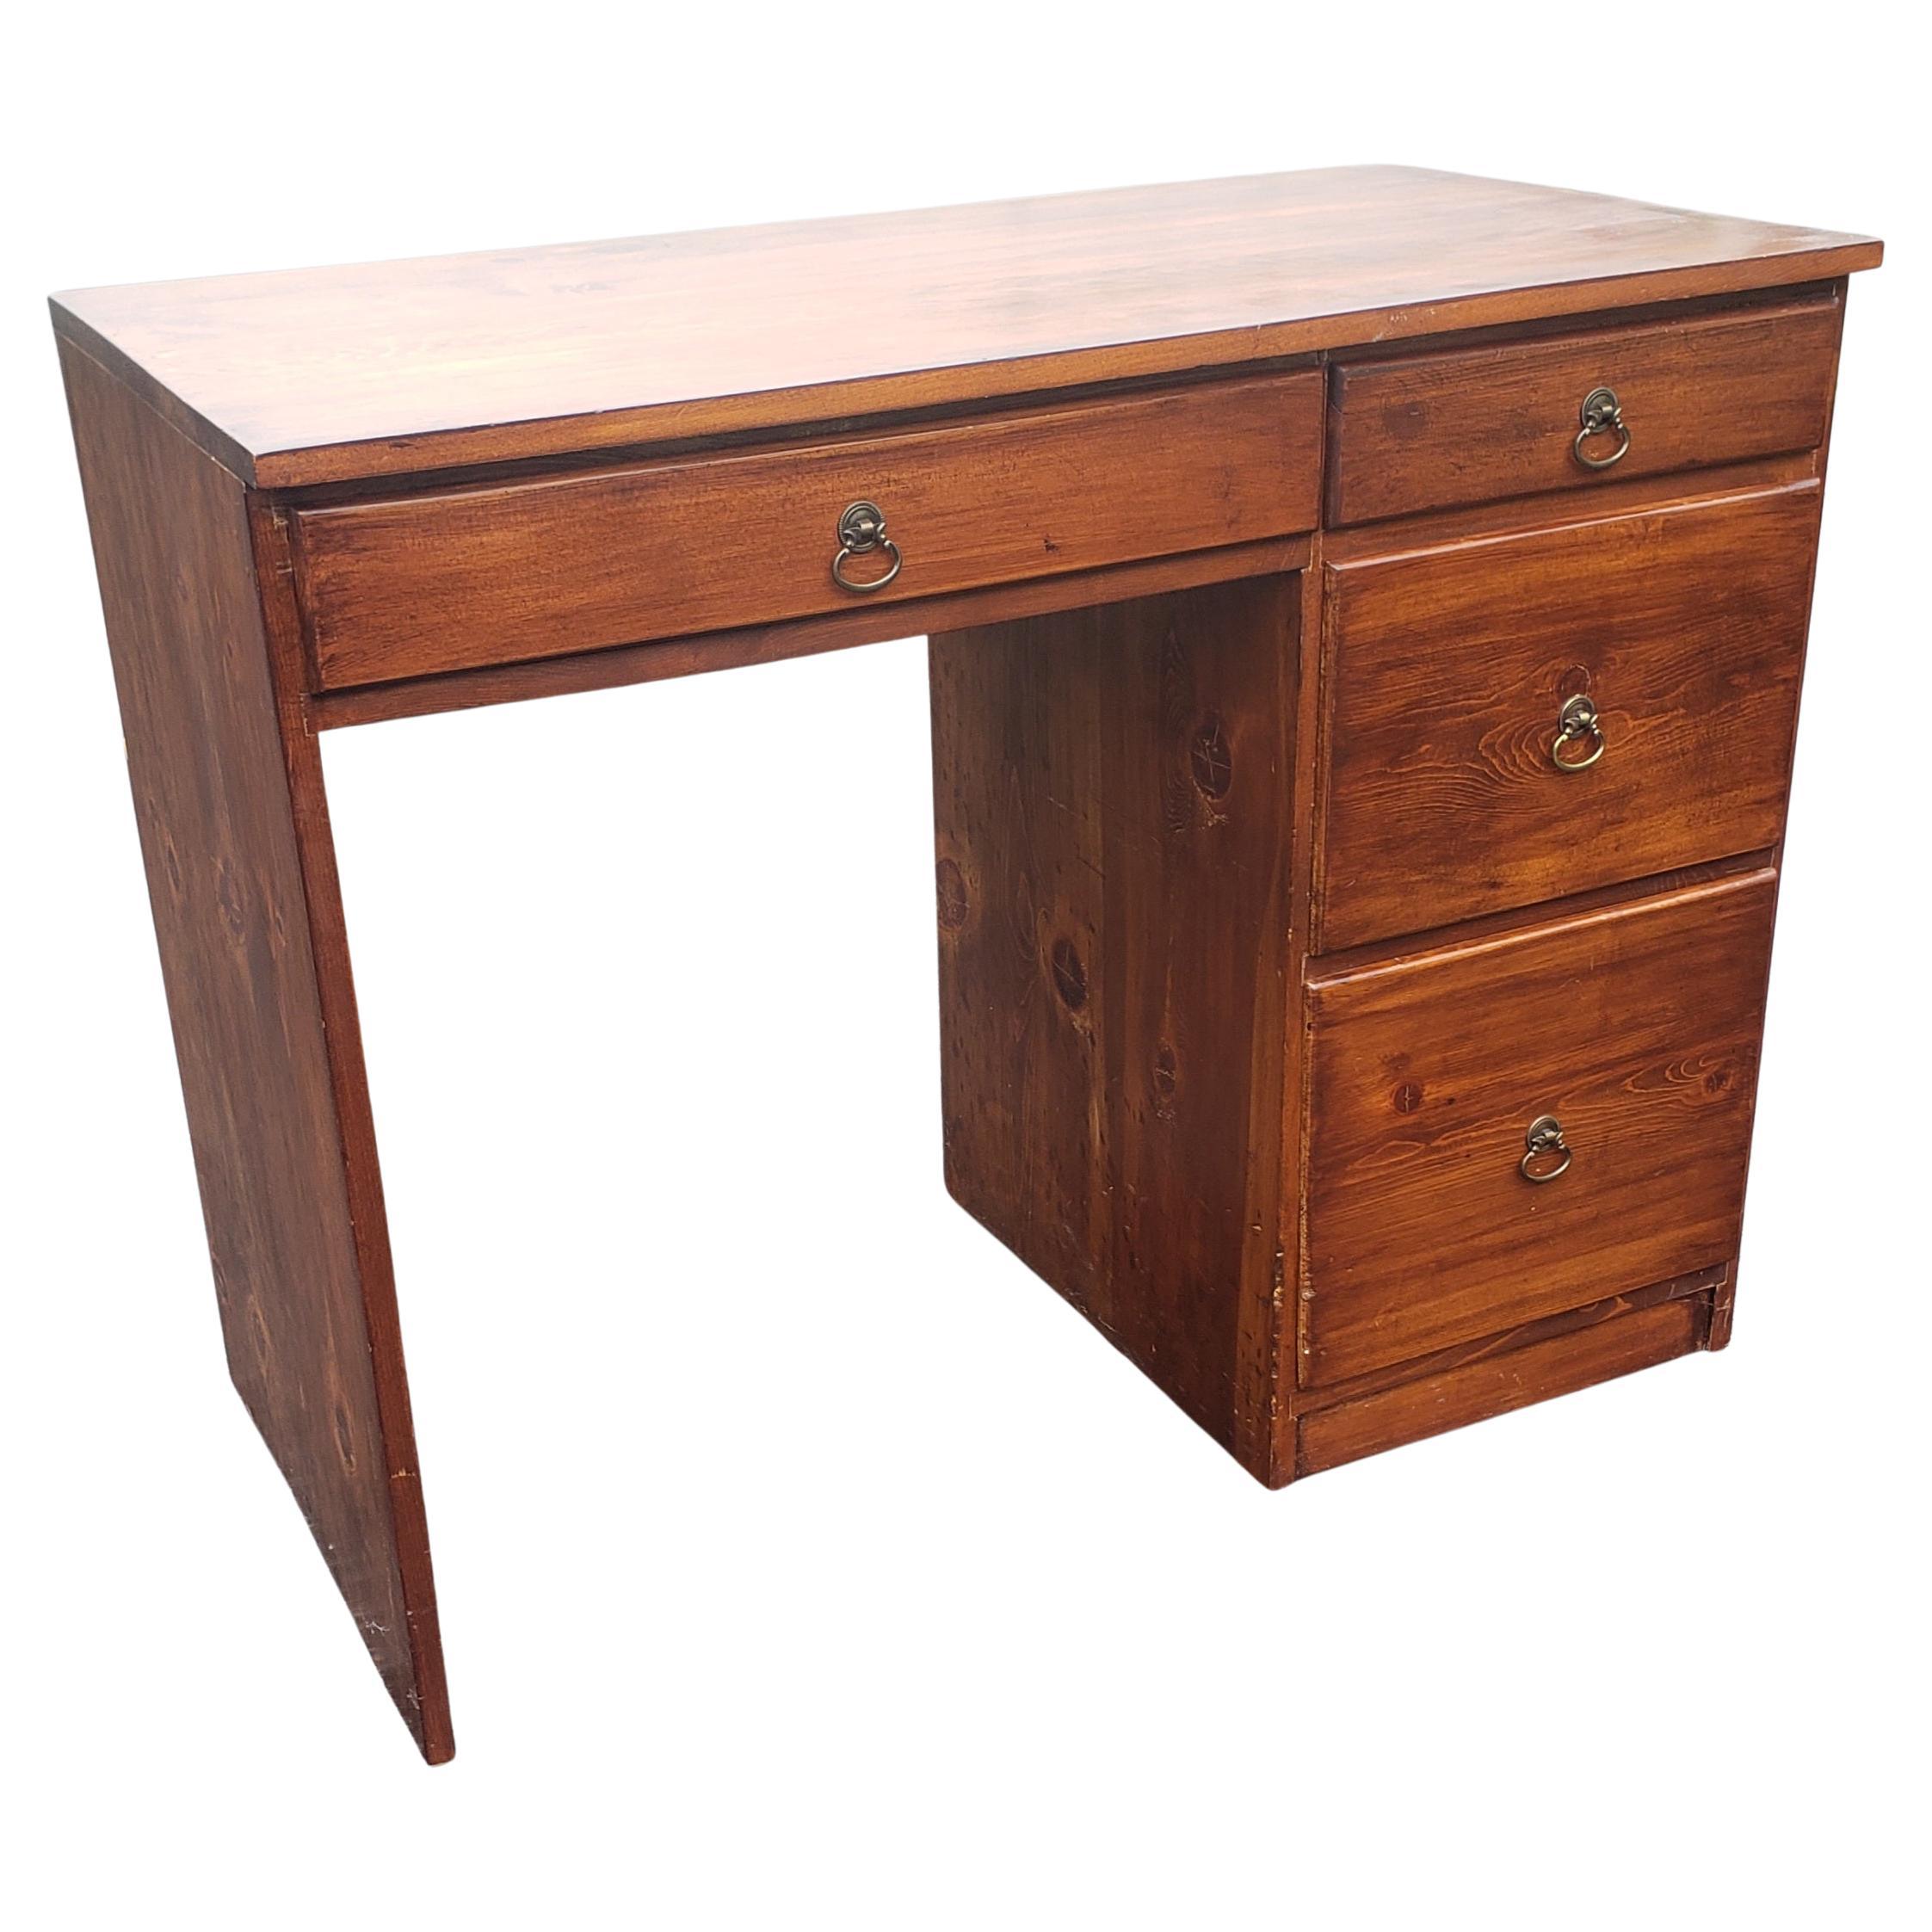 A classic 4 drawer solid study desk from the 1970s. Measures 38